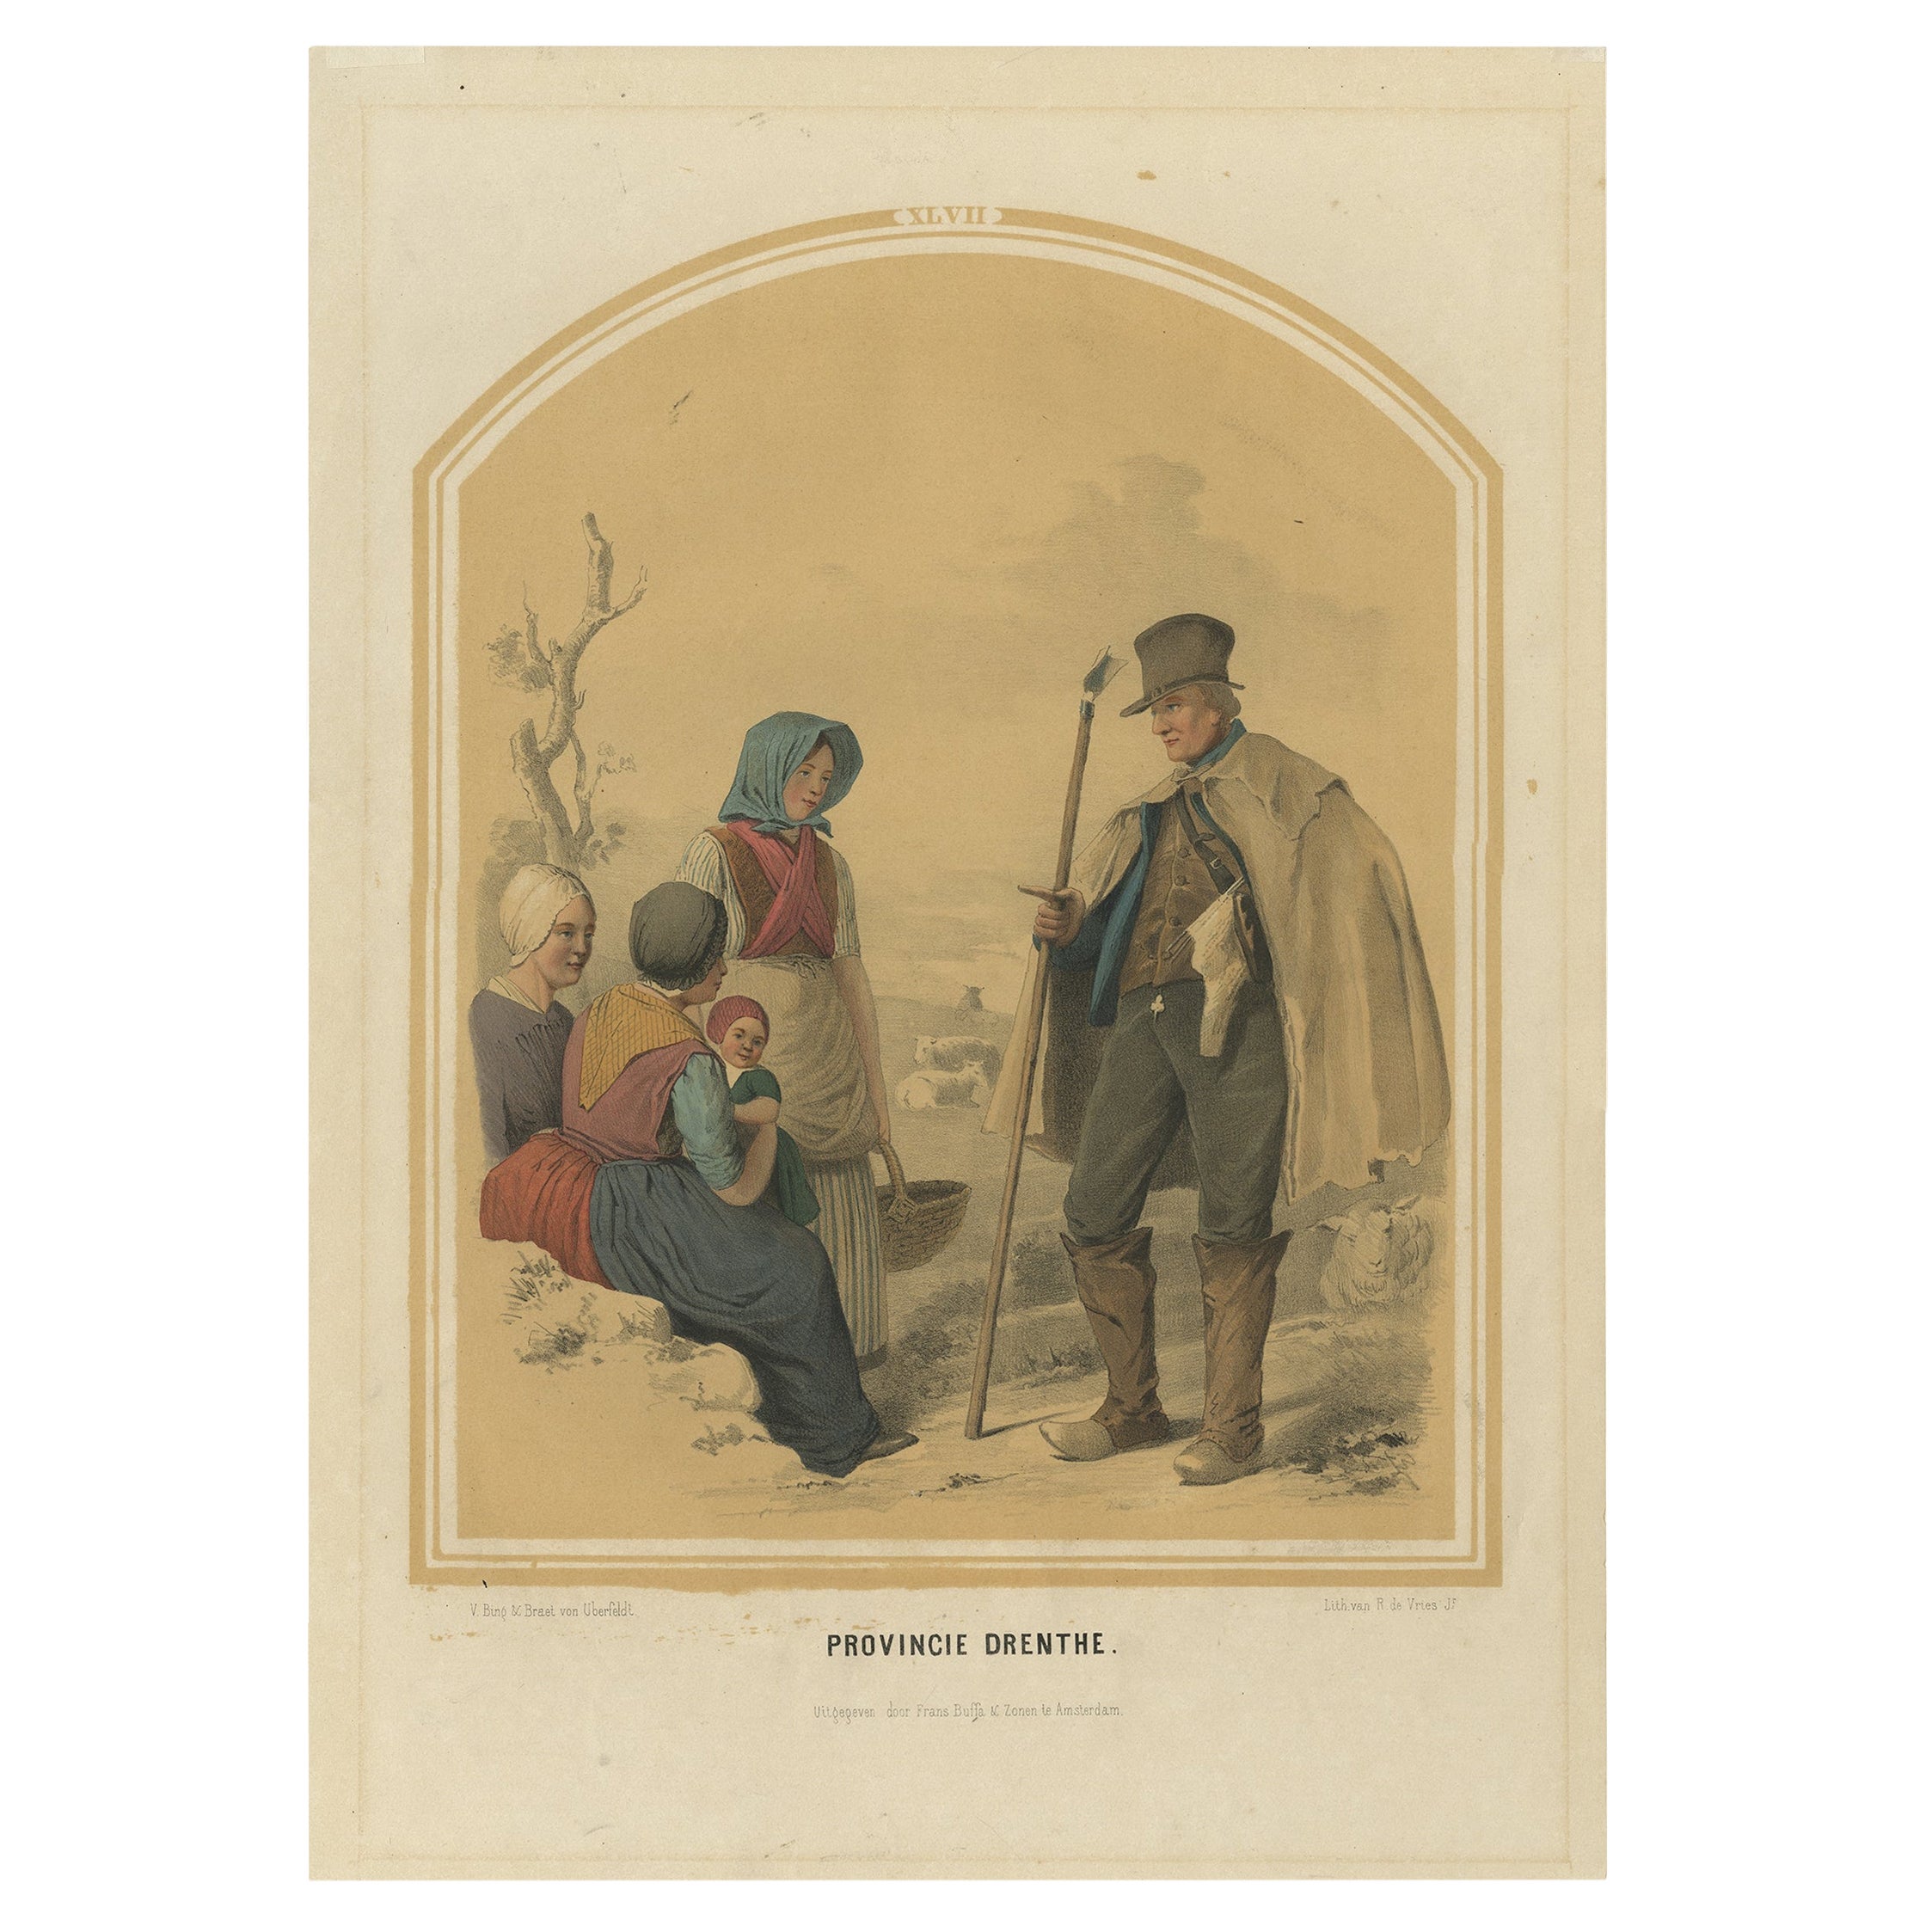 Antique Costume Print of the Province of Drenthe, Holland, 1857